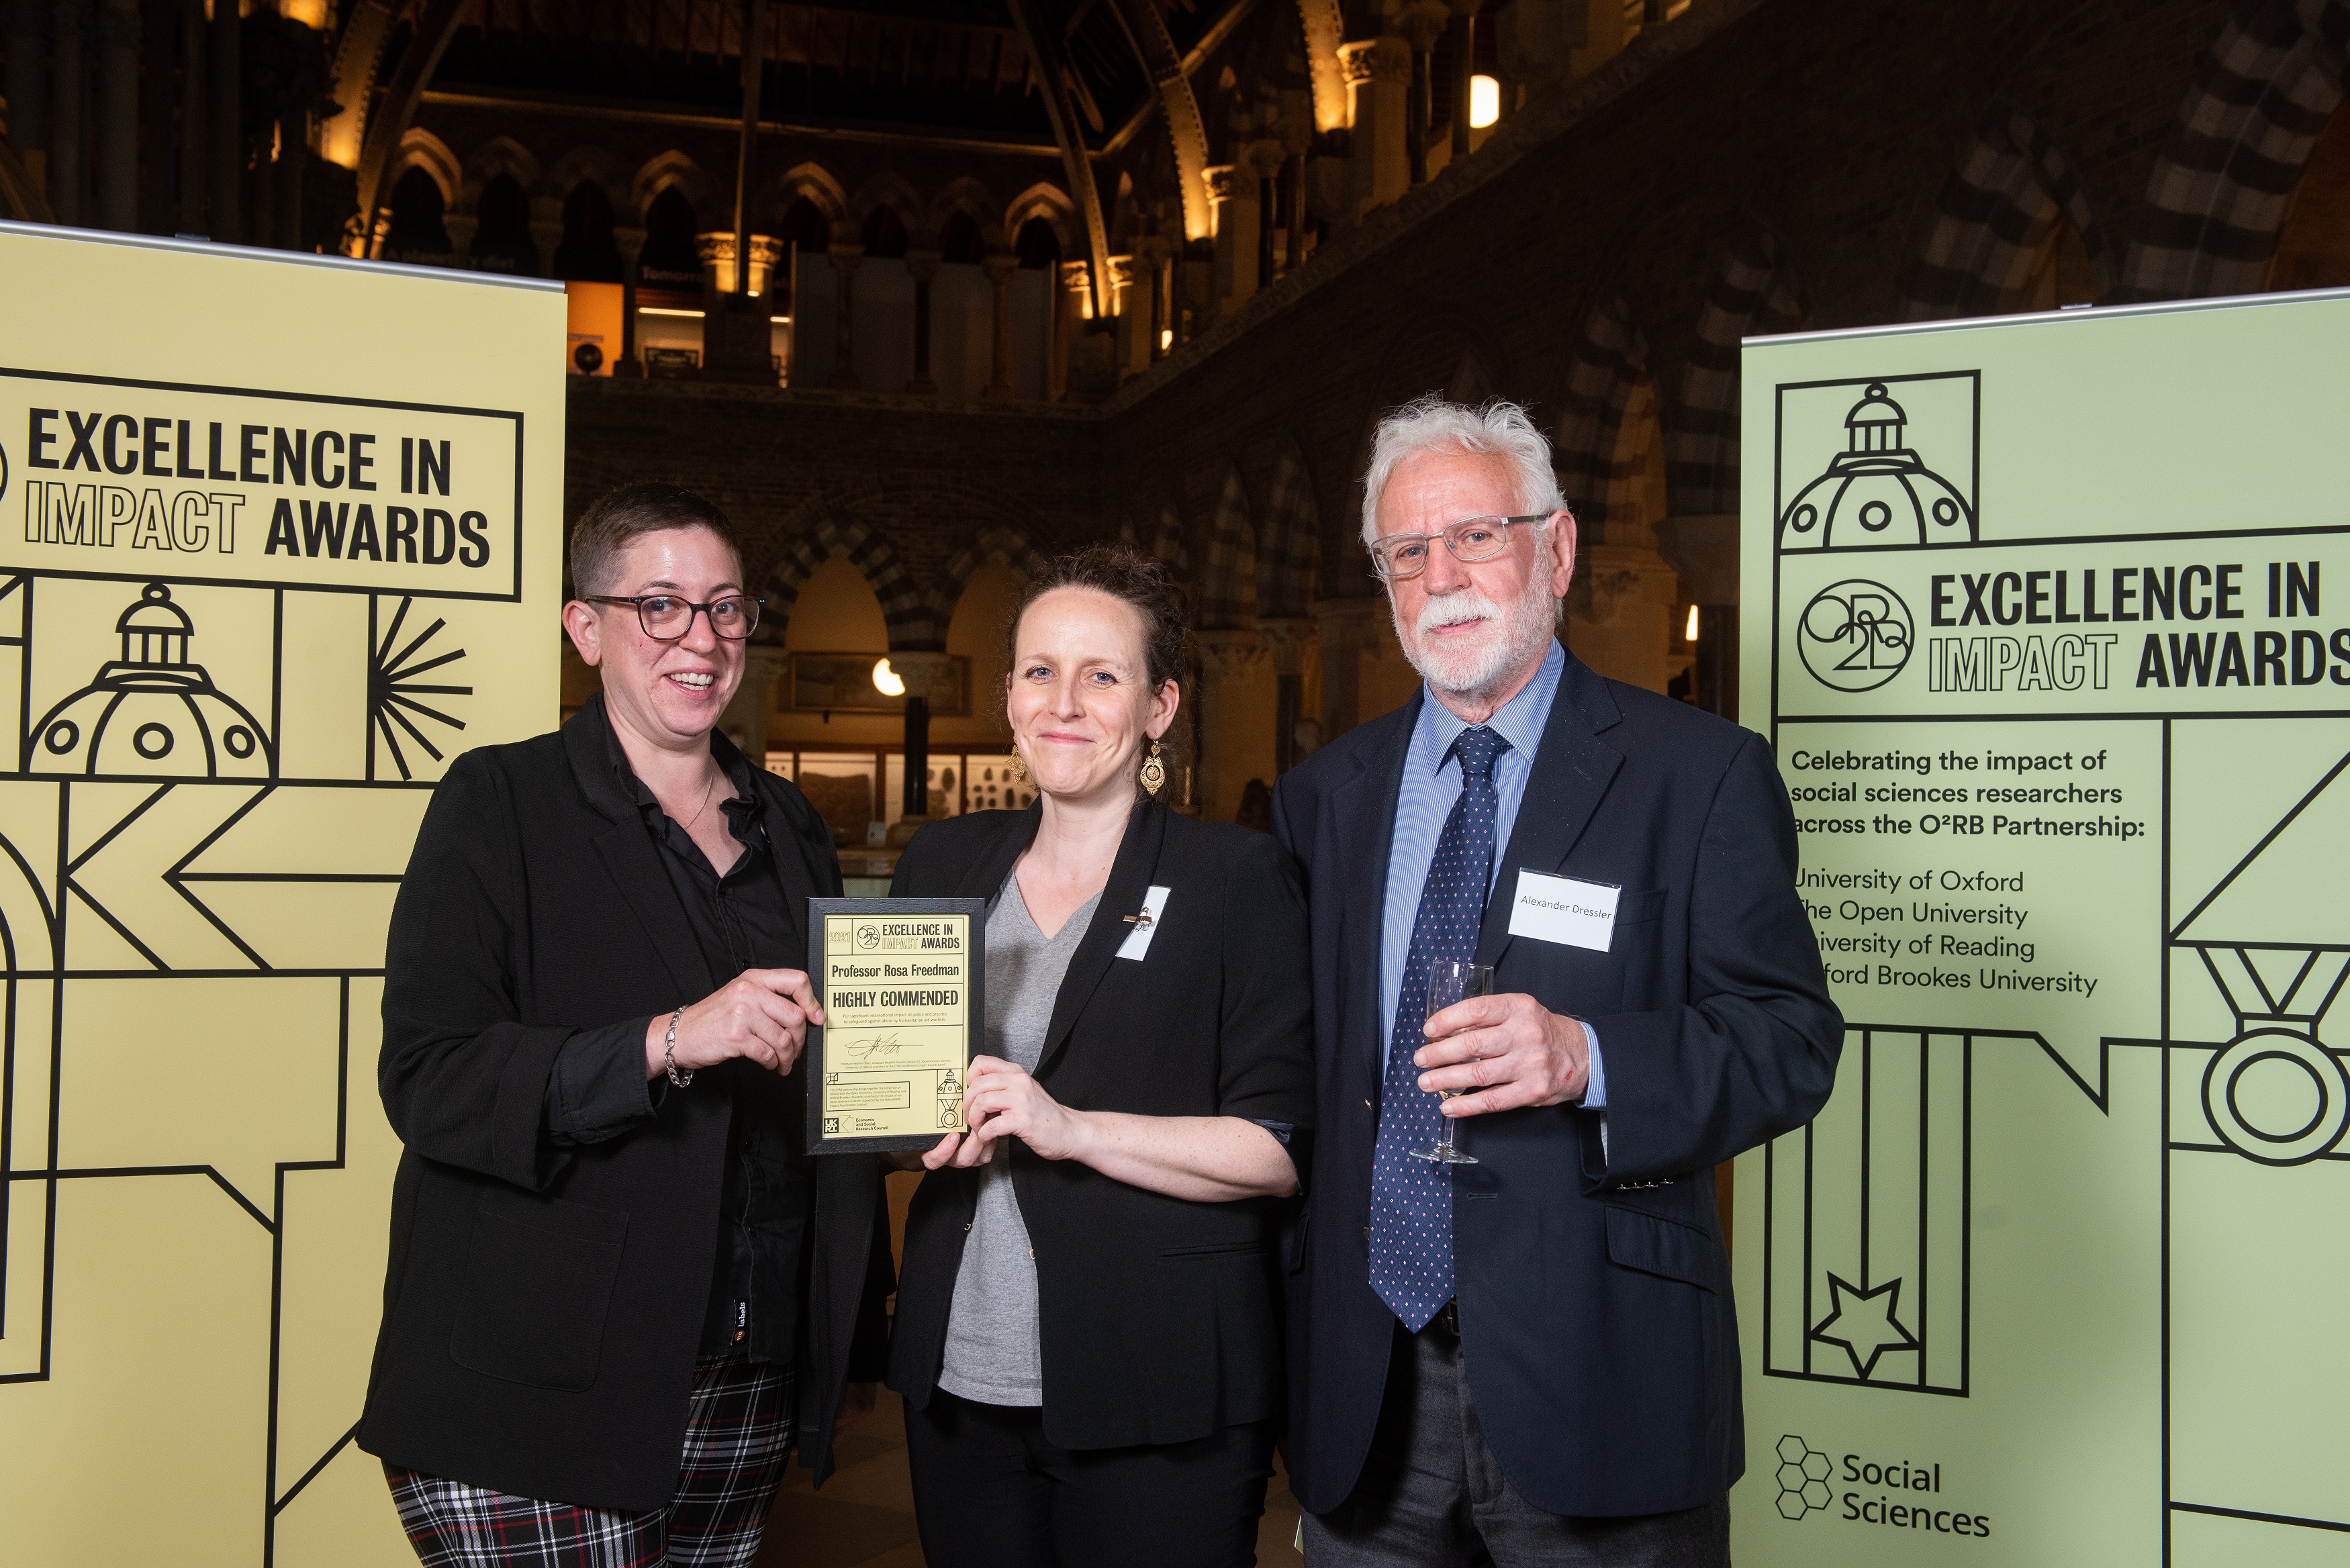 Prof Rosa Freedman holds the Highly Commended award with Sarah Blakemore and Alex Dressler, flanked by event branding at the awards reception